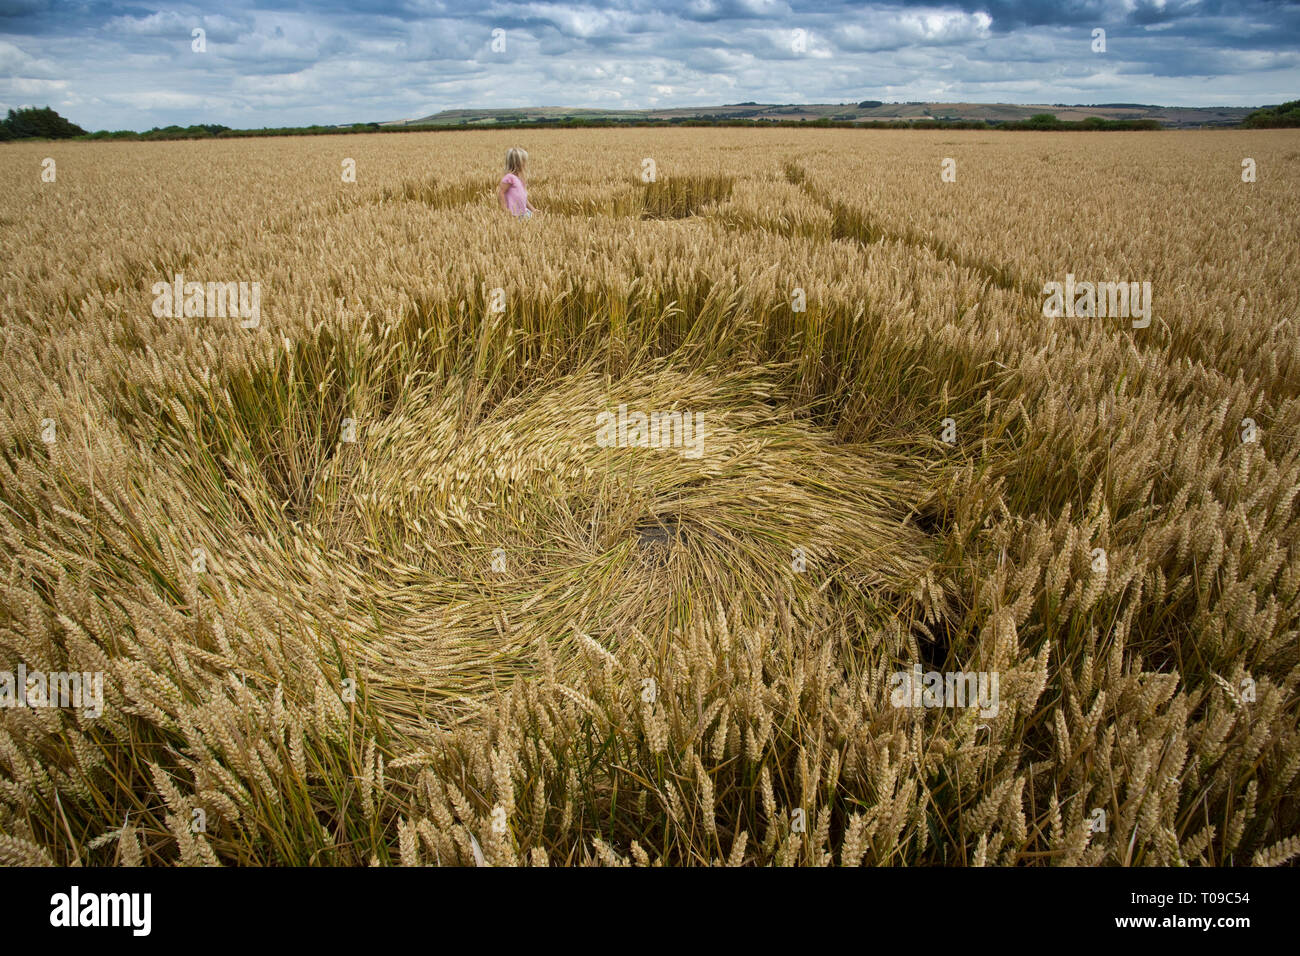 Great Britain, England, Wiltshire.  A young girl exploring a huge 2016 crop circle in wheat. Stock Photo